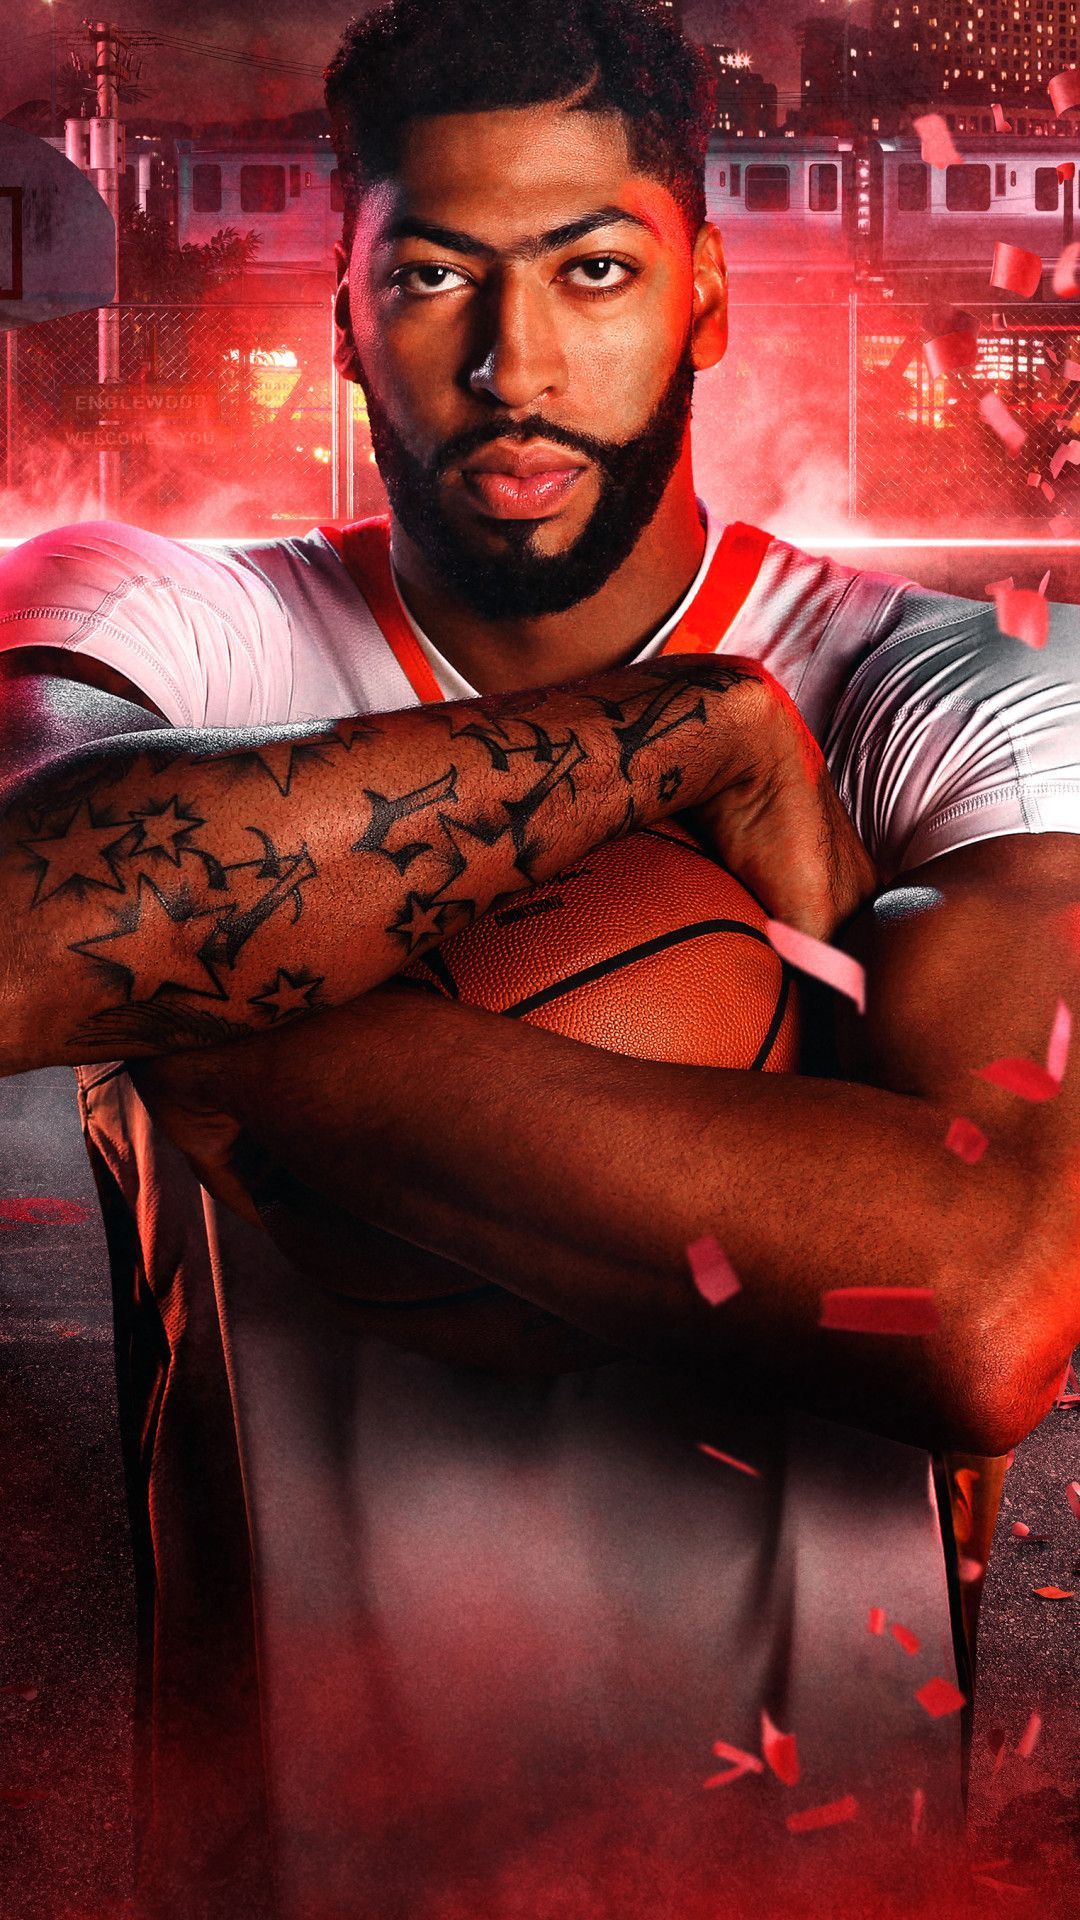 Nba 2k20 Mobile Wallpaper (iPhone, Android, Samsung, Pixel, Xiaomi). Mobile wallpaper, Nba picture, iPhone wallpaper